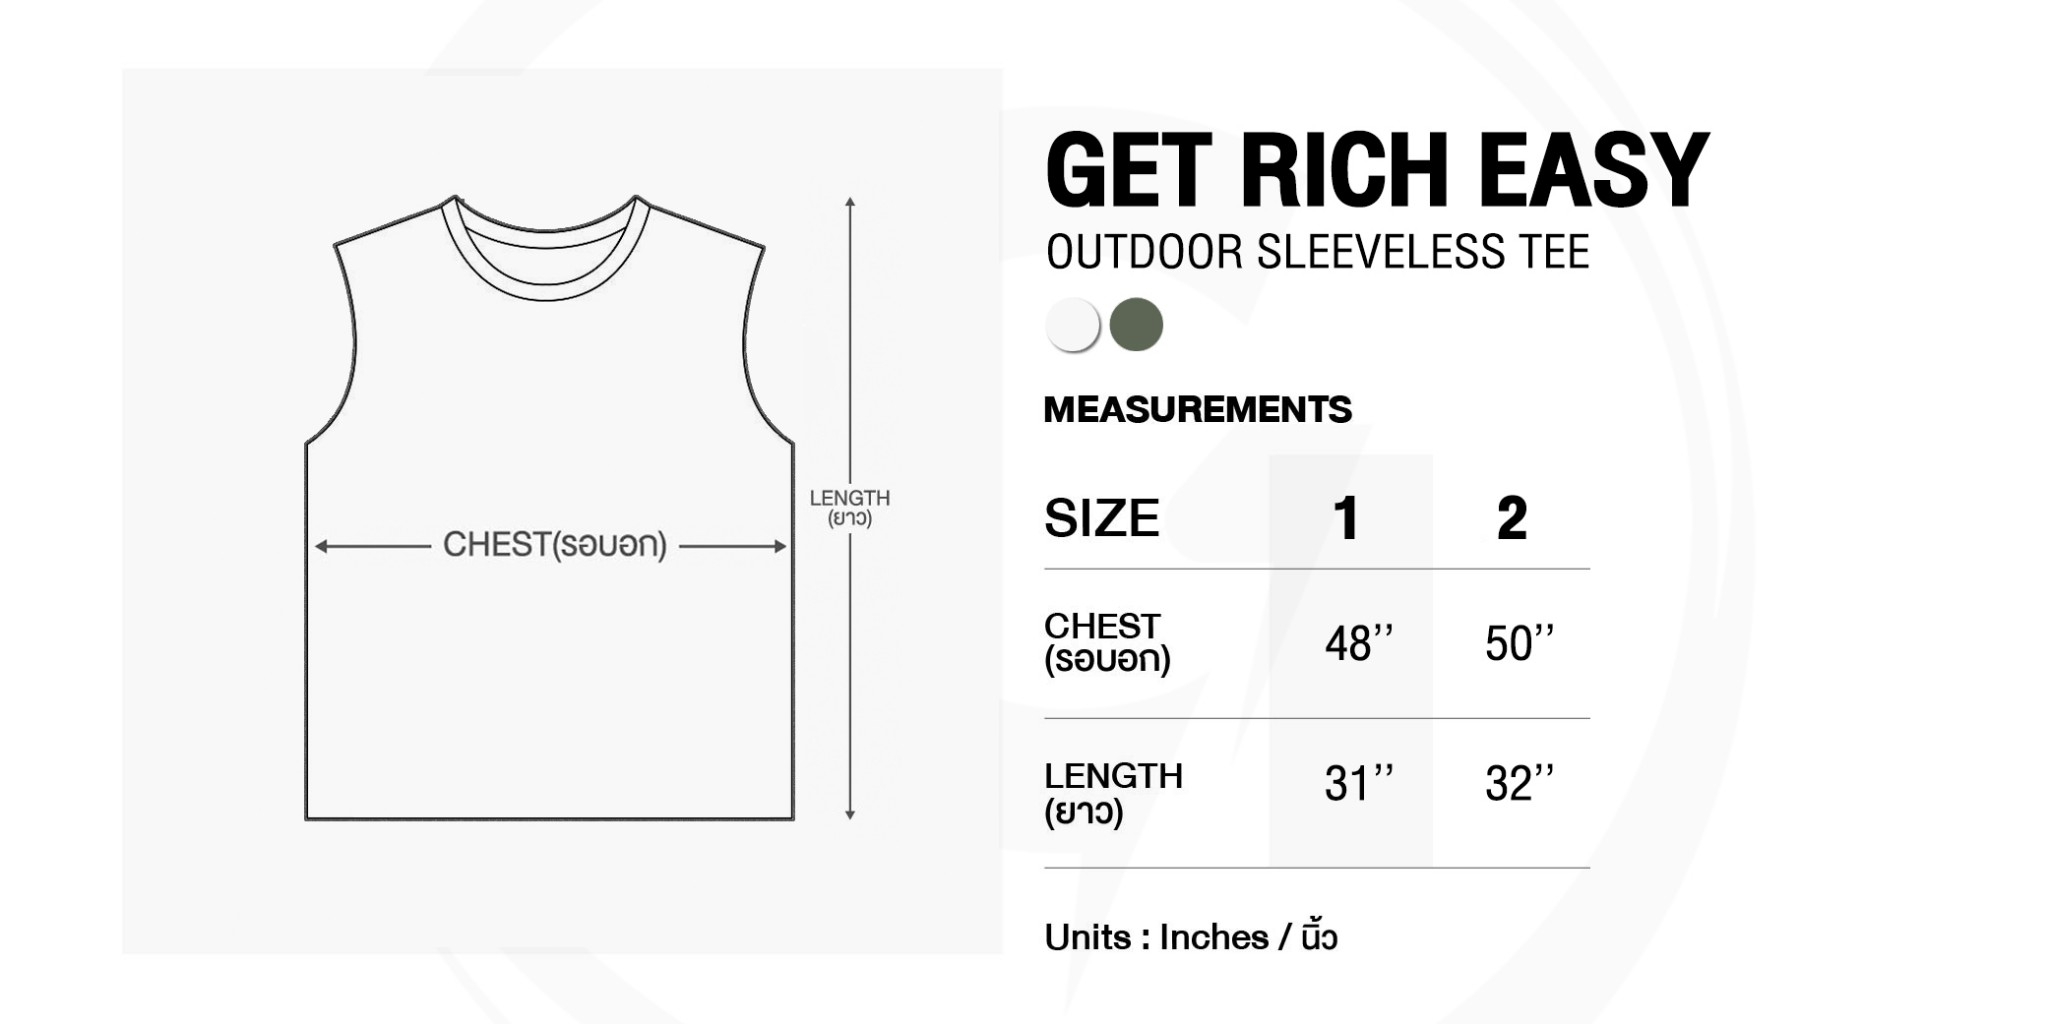 GET RICH EASY OUTDOOR SLEEVELESS TEE WHITE